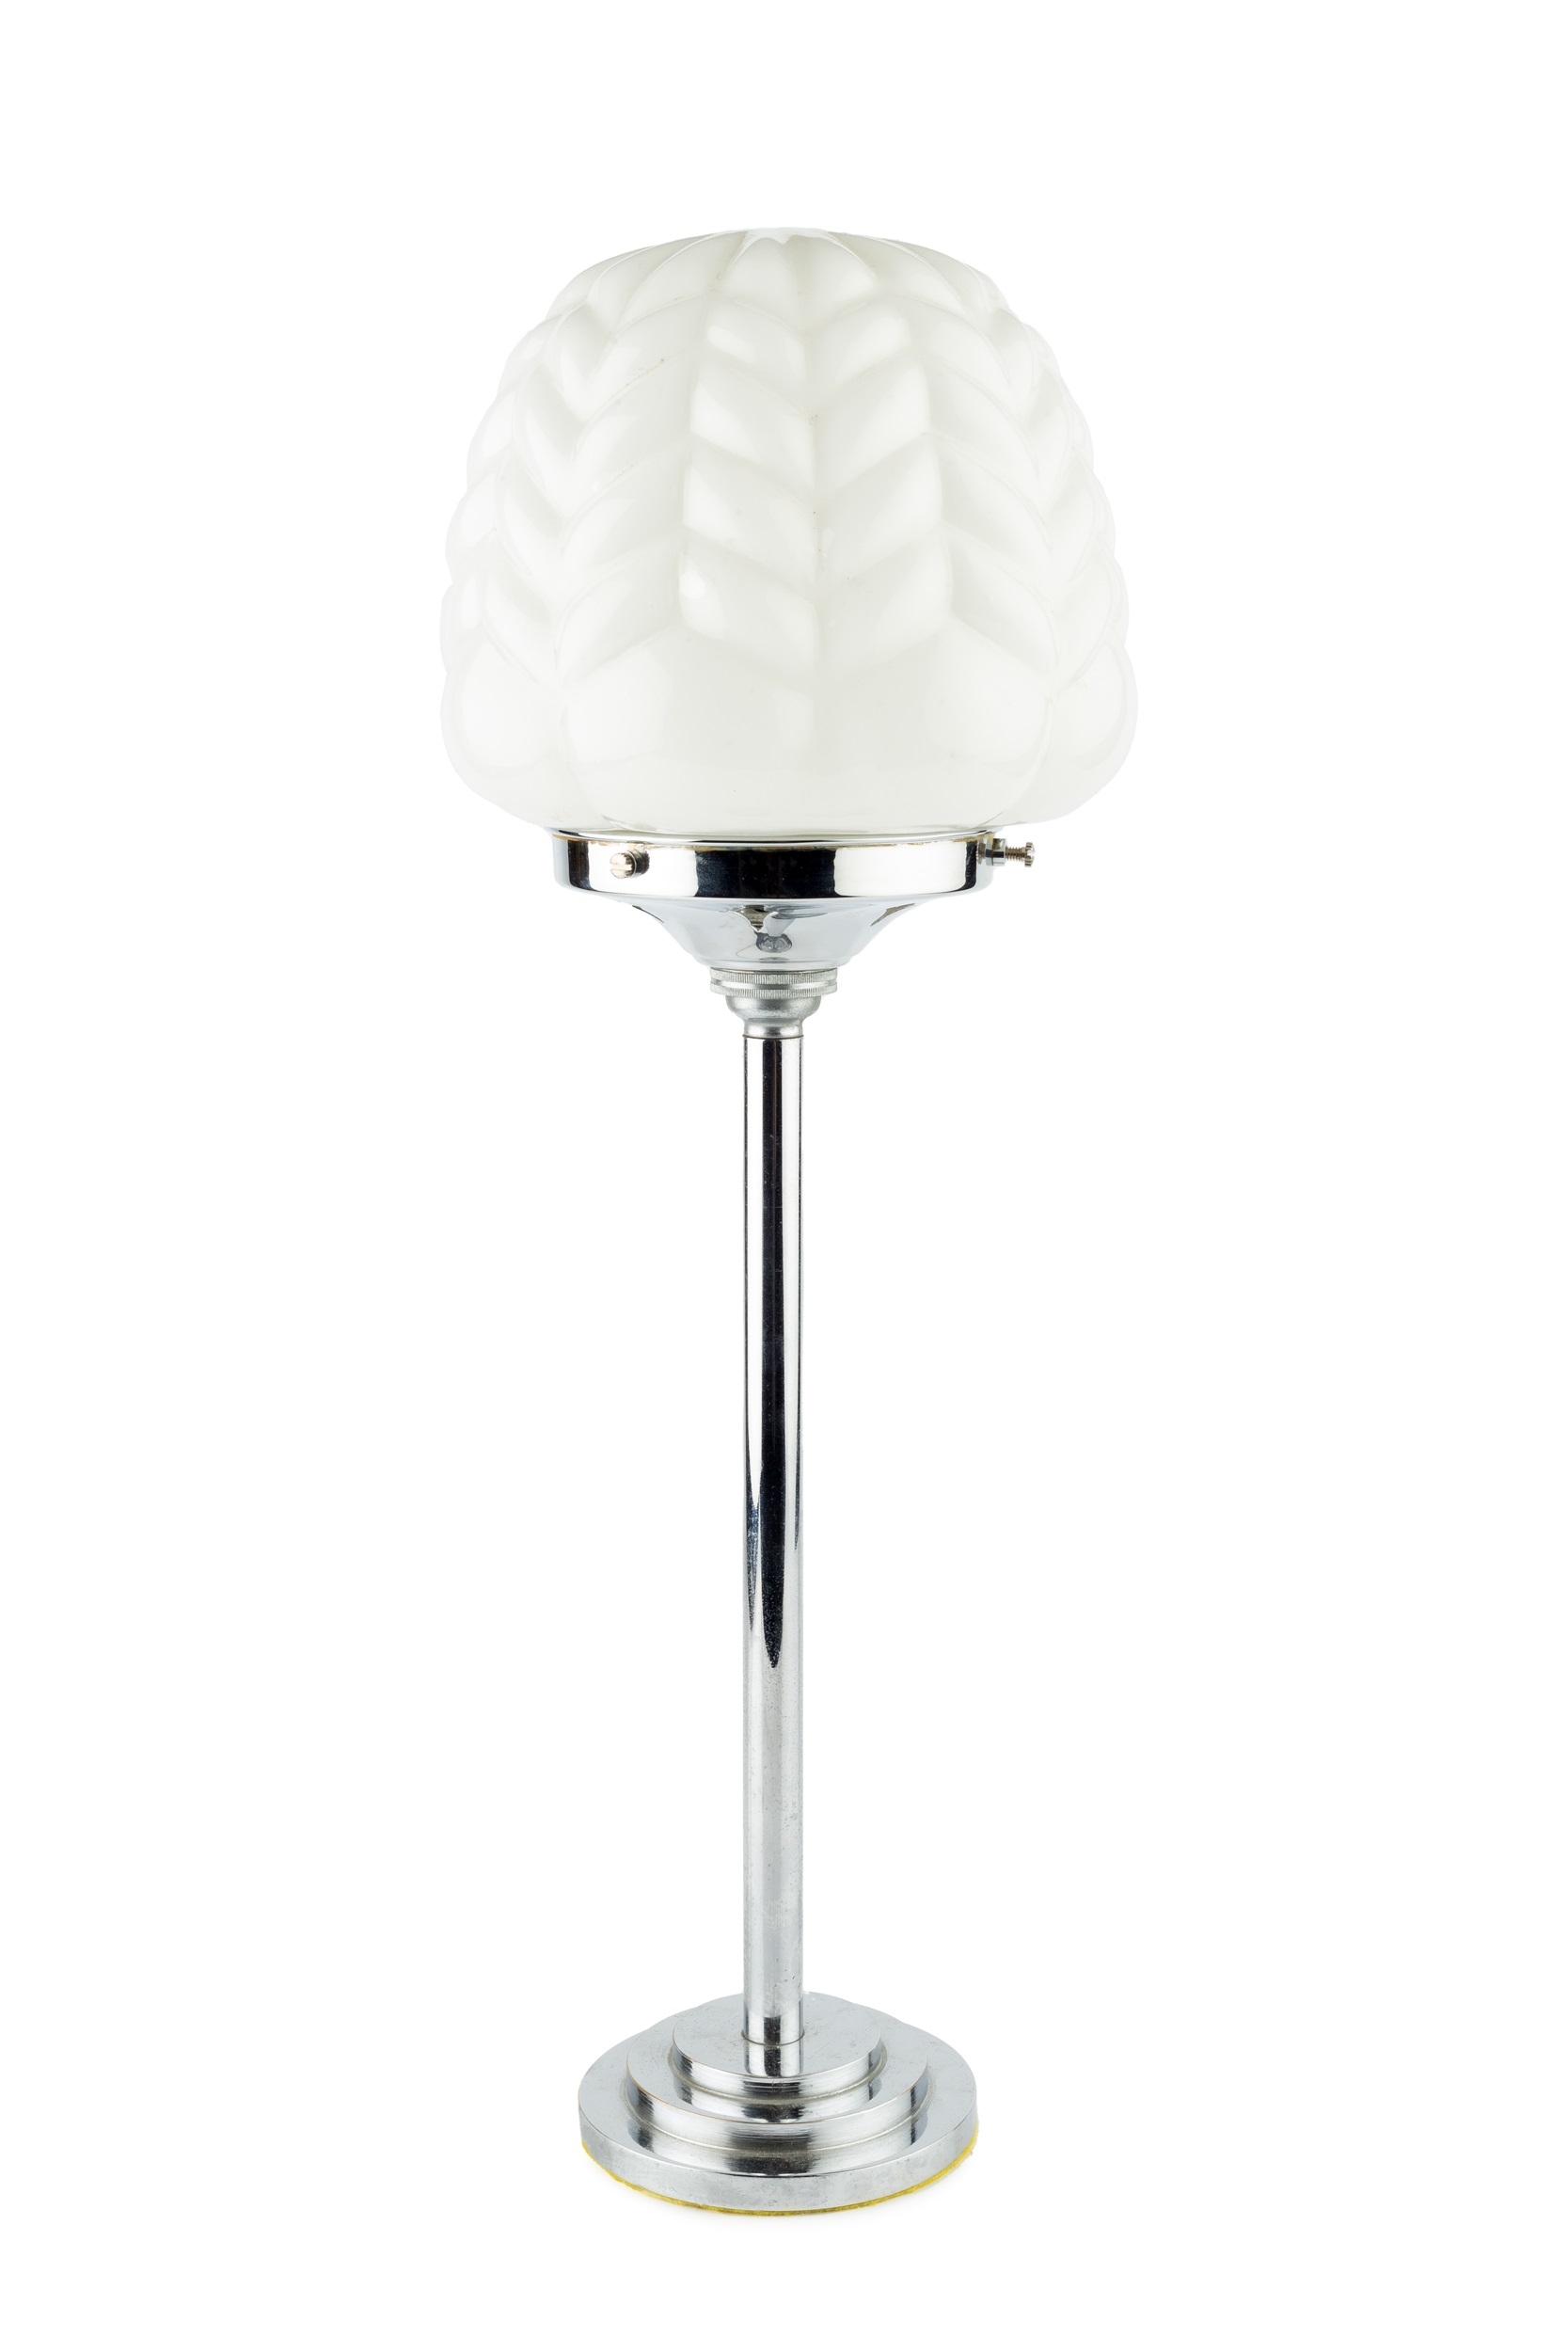 Art Deco Table lamp chrome base with white opaline glass shade 49cm high.